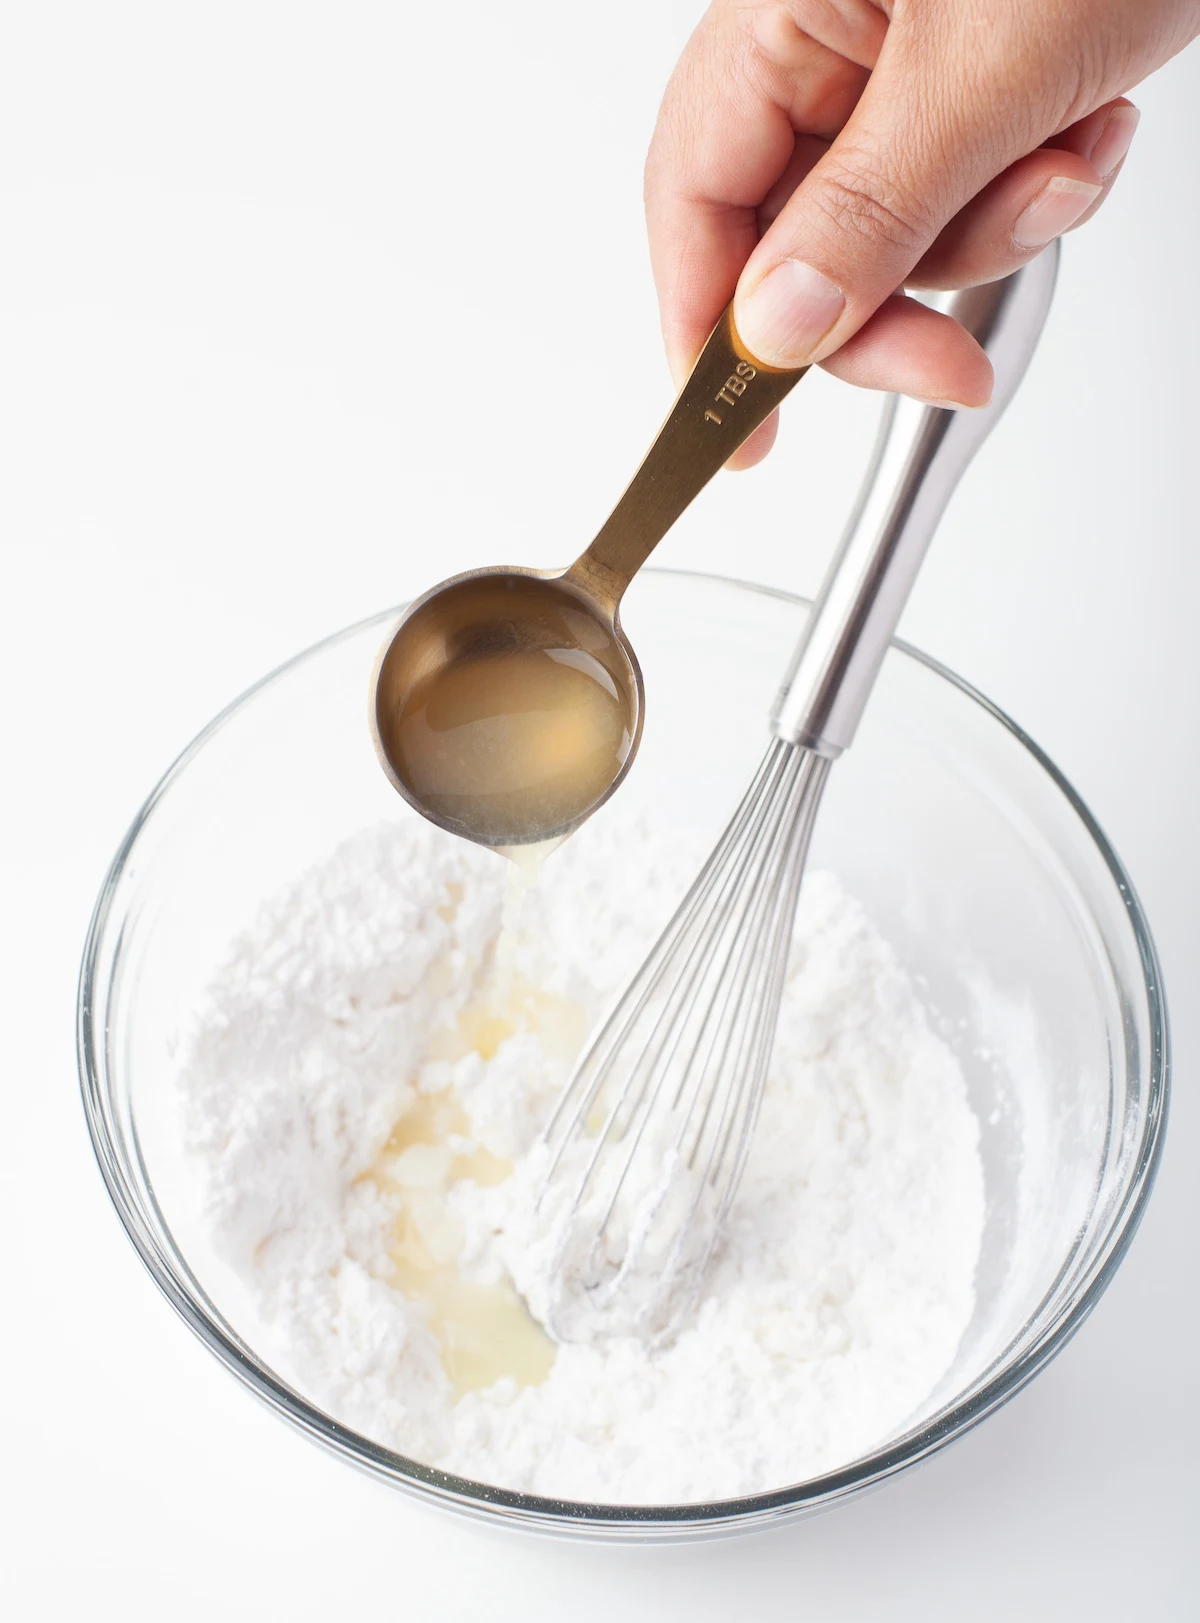 Adding lemon juice to powdered sugar in a clear glass bowl